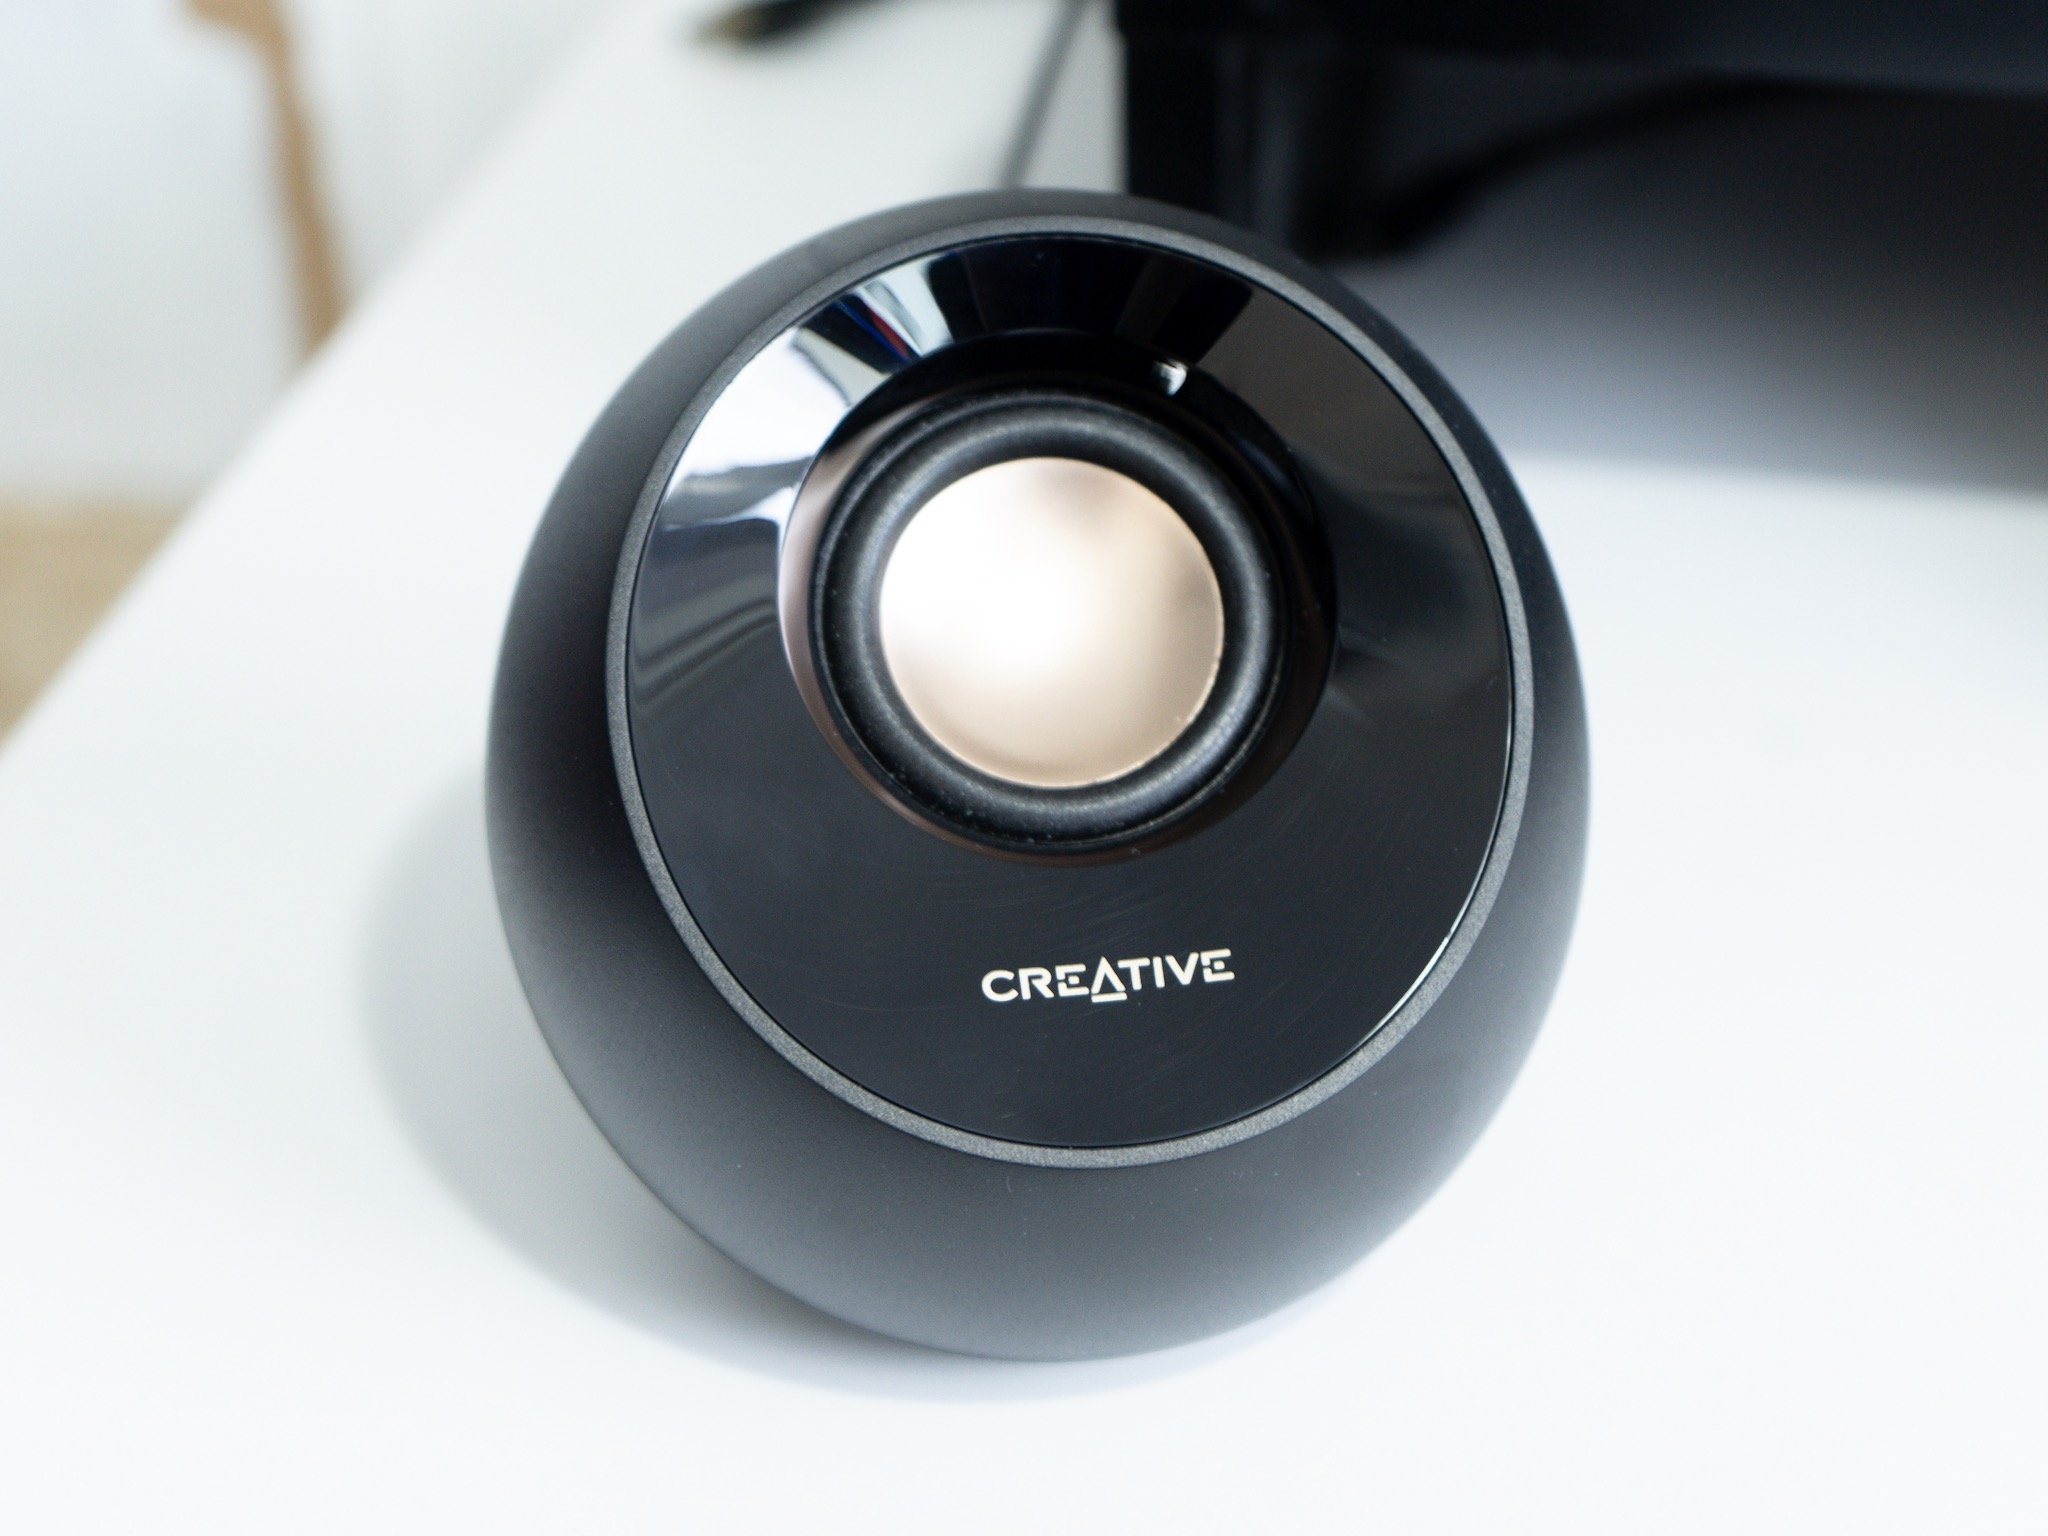 Creative Pebble Plus review: Sound quality far above the price tag